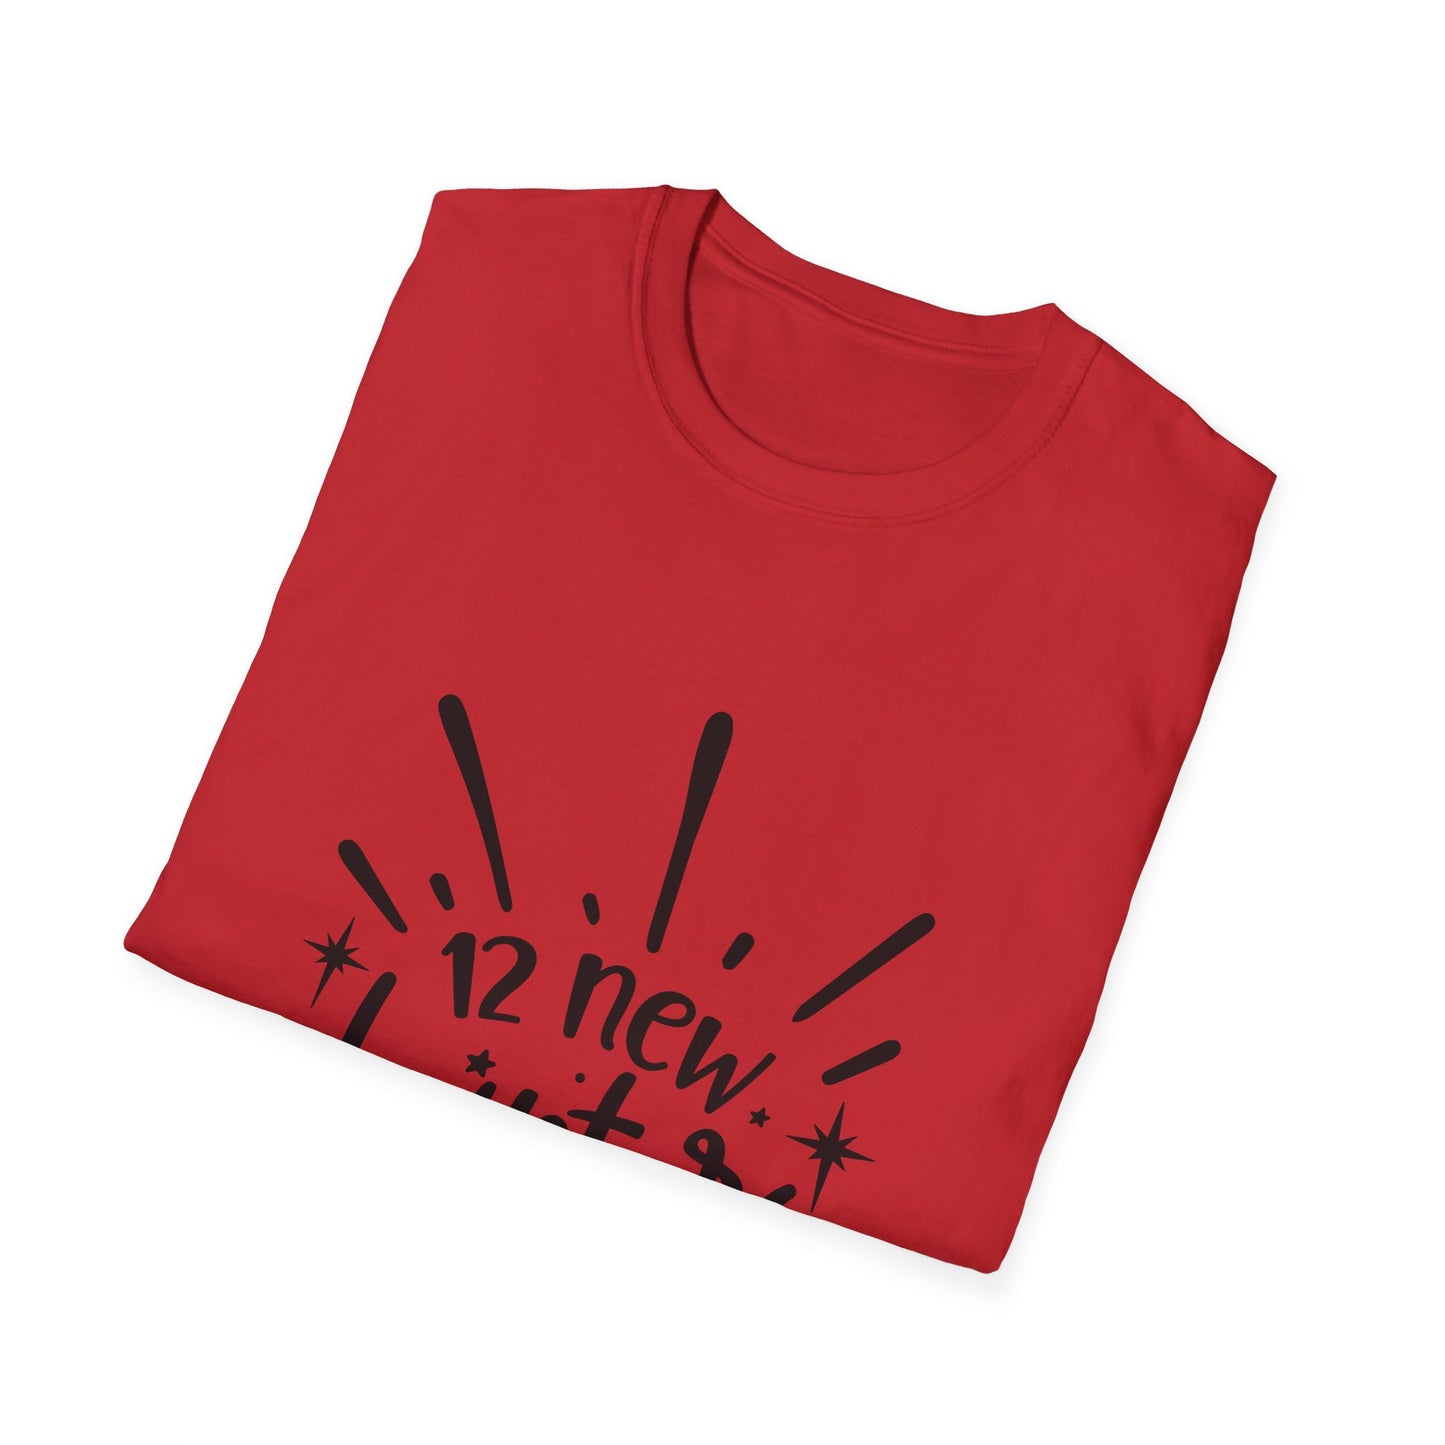 12 New Chapters Unisex Softstyle T-Shirt